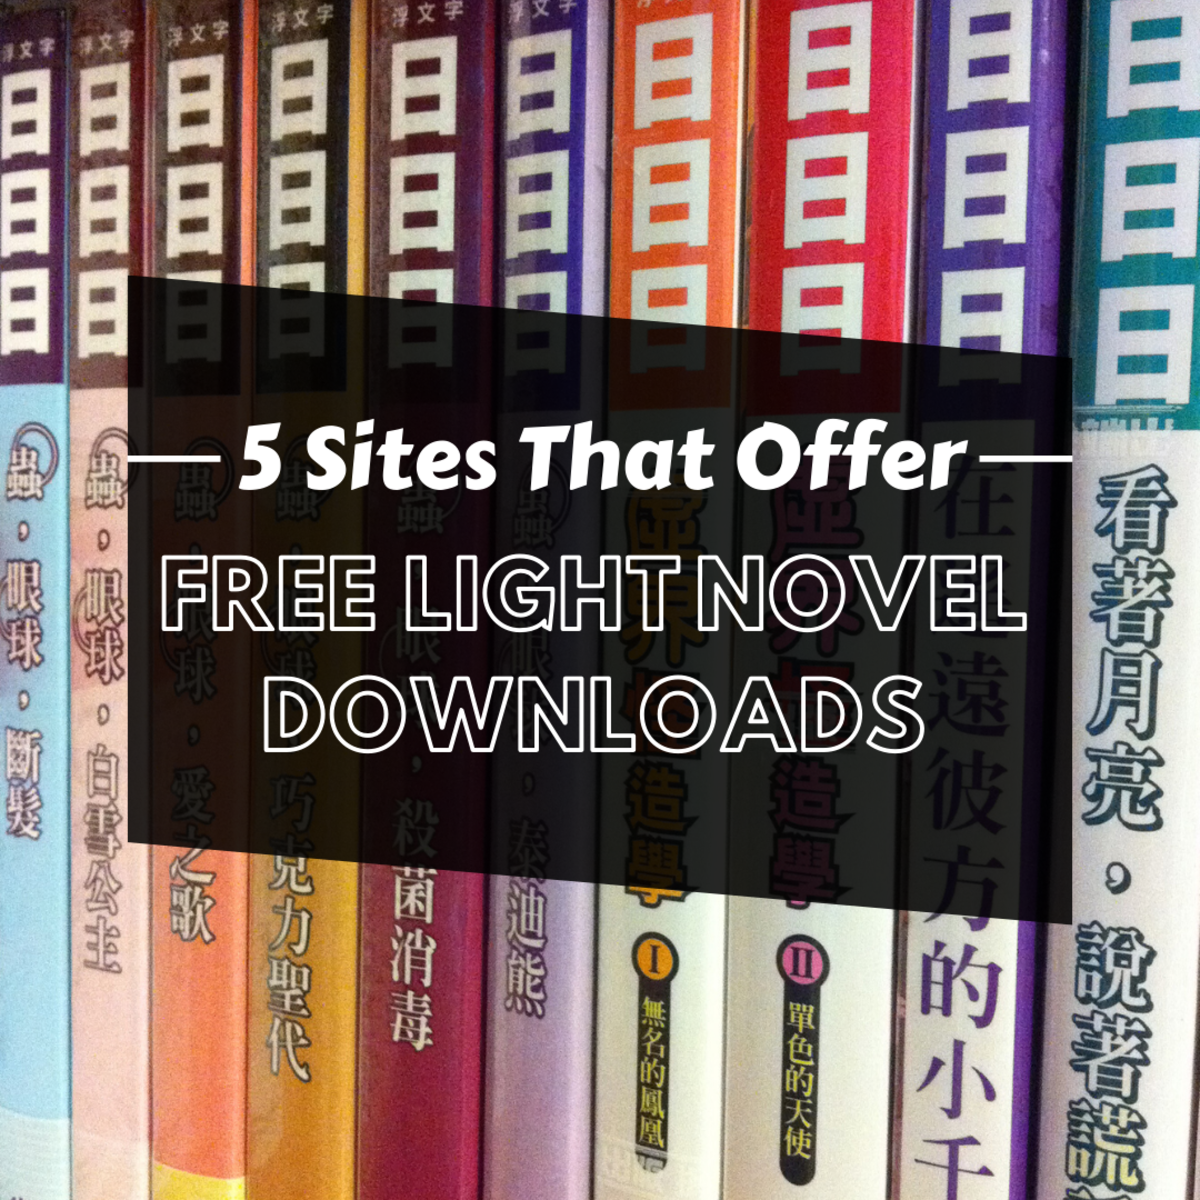 These five sites offer selections of free and downloadable light novels in Japanese, Korean, Chinese, and English. 